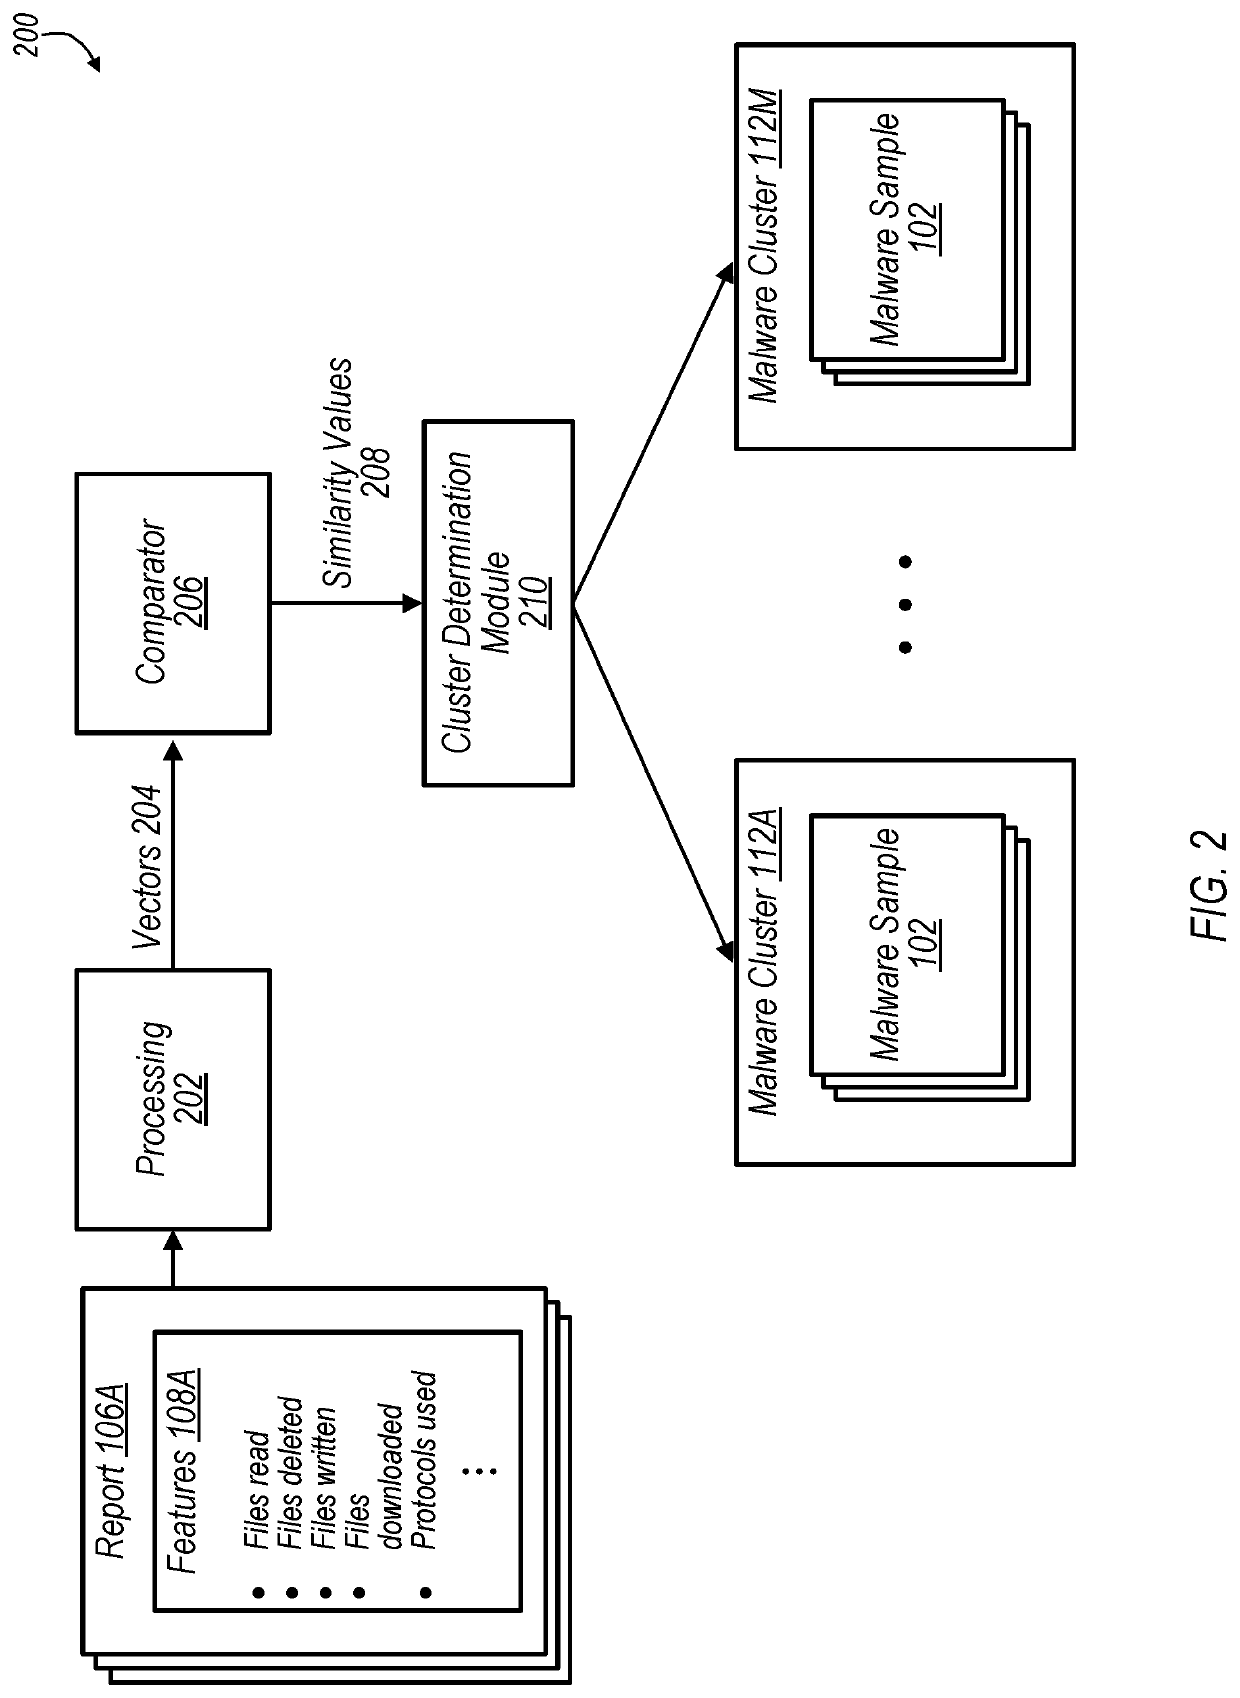 Malware clustering based on function call graph similarity